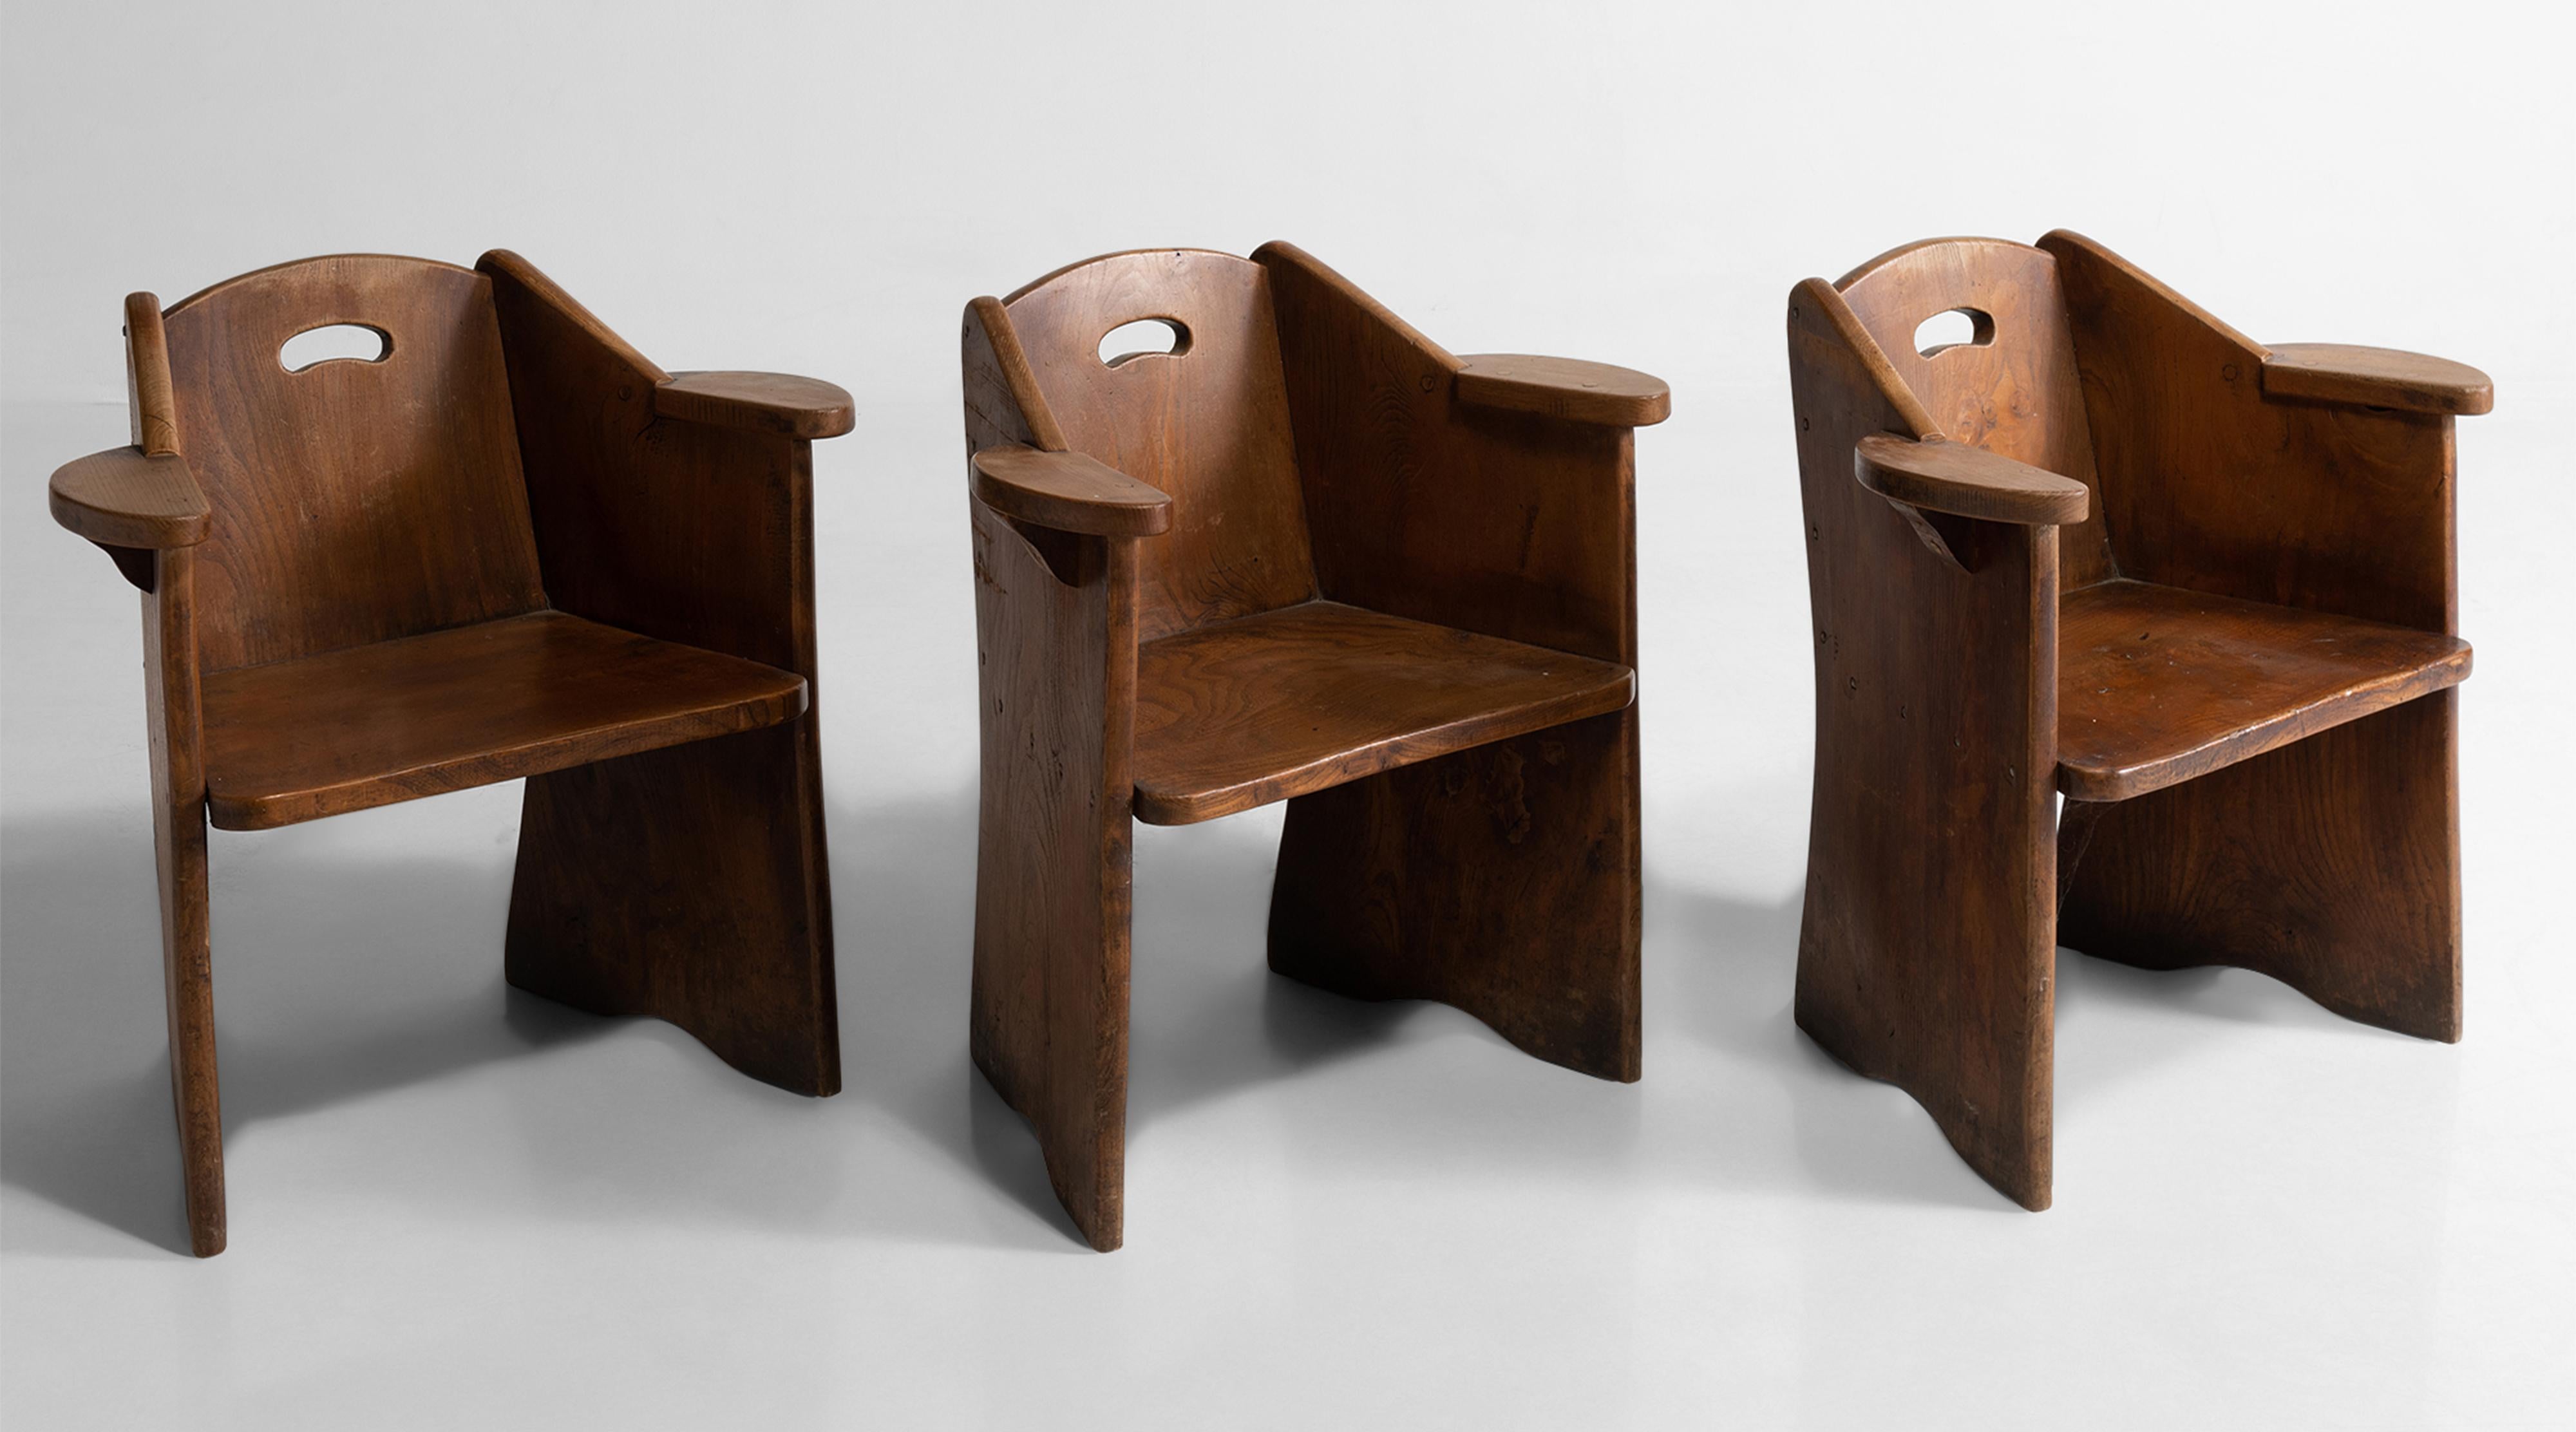 Oak ships chairs, England circa 1880.

Unique form constructed with slabs of oak.

Measures: 26.5” width x 18” depth x 28” height x 15” seat.